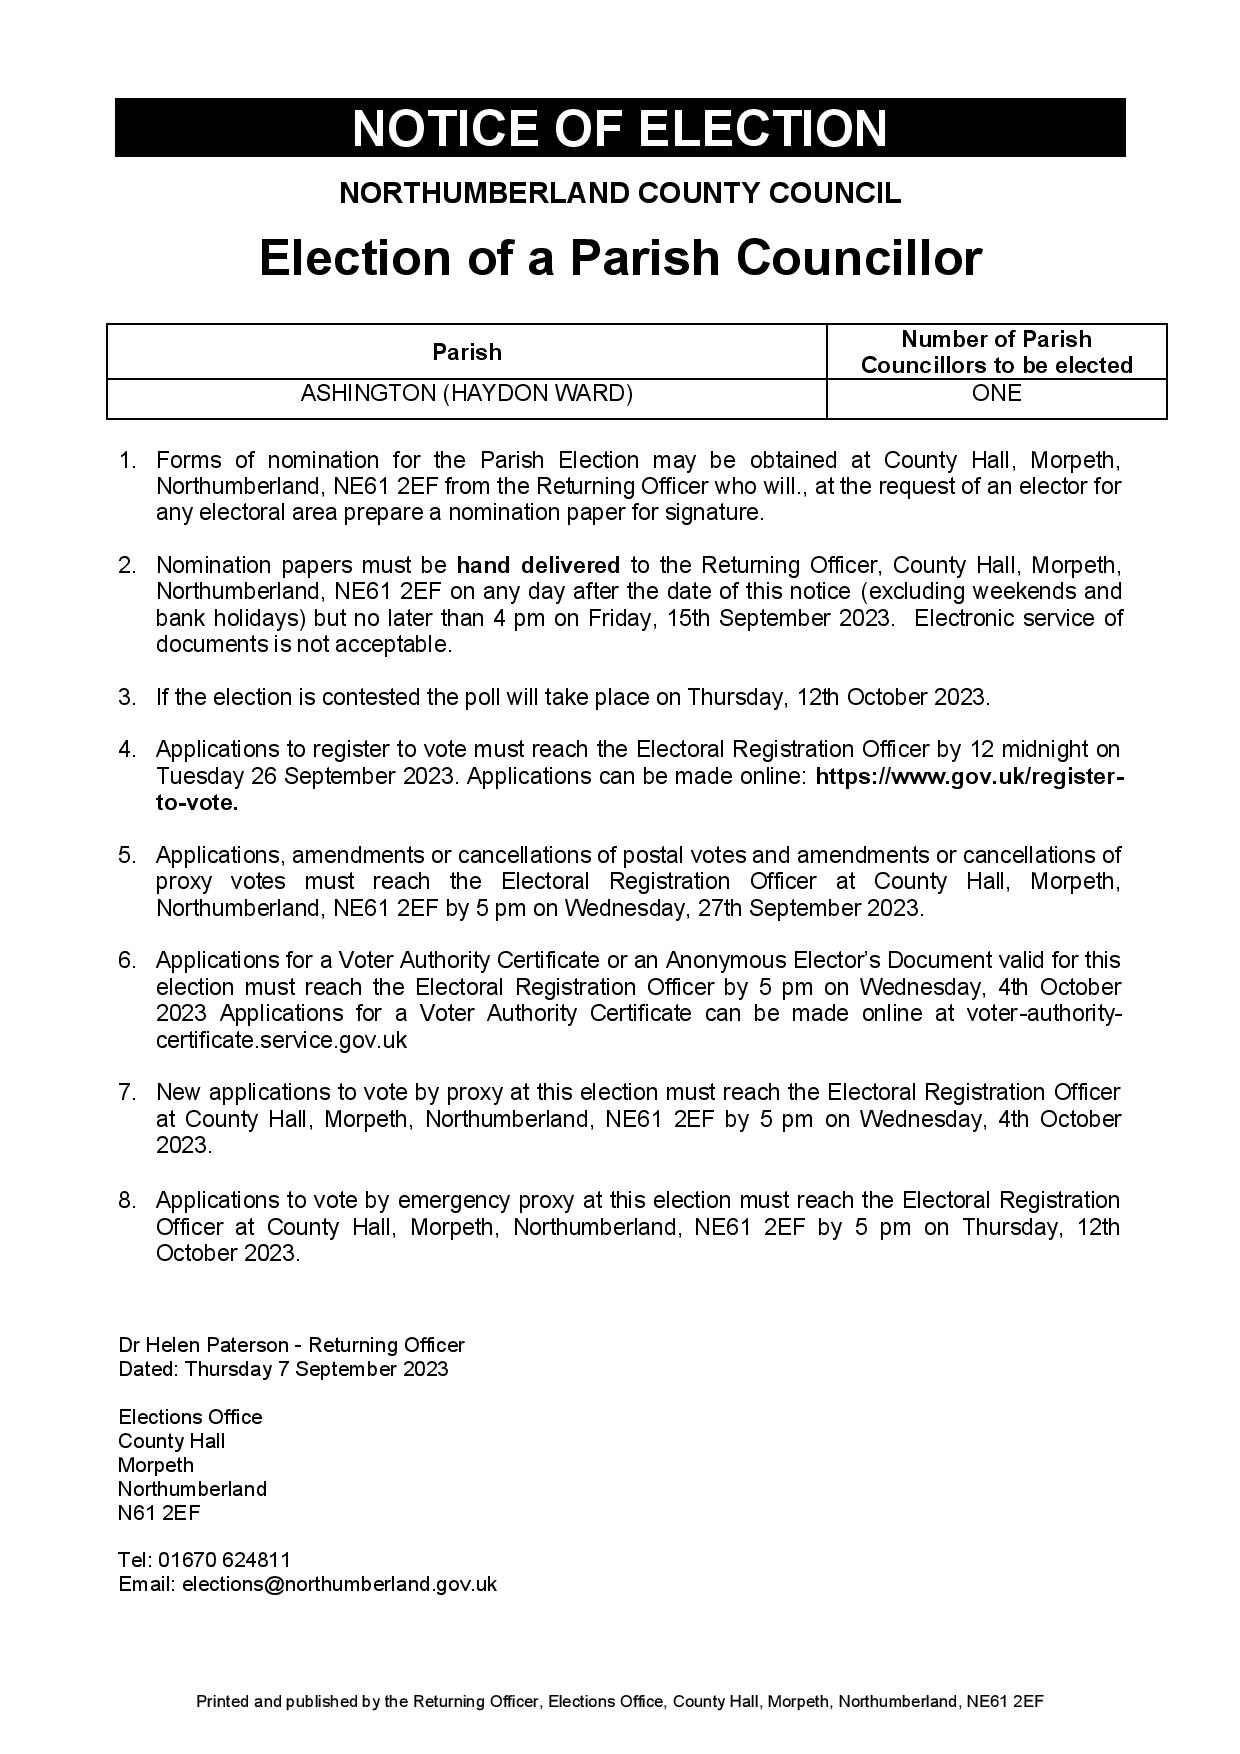 Image of Election Notice